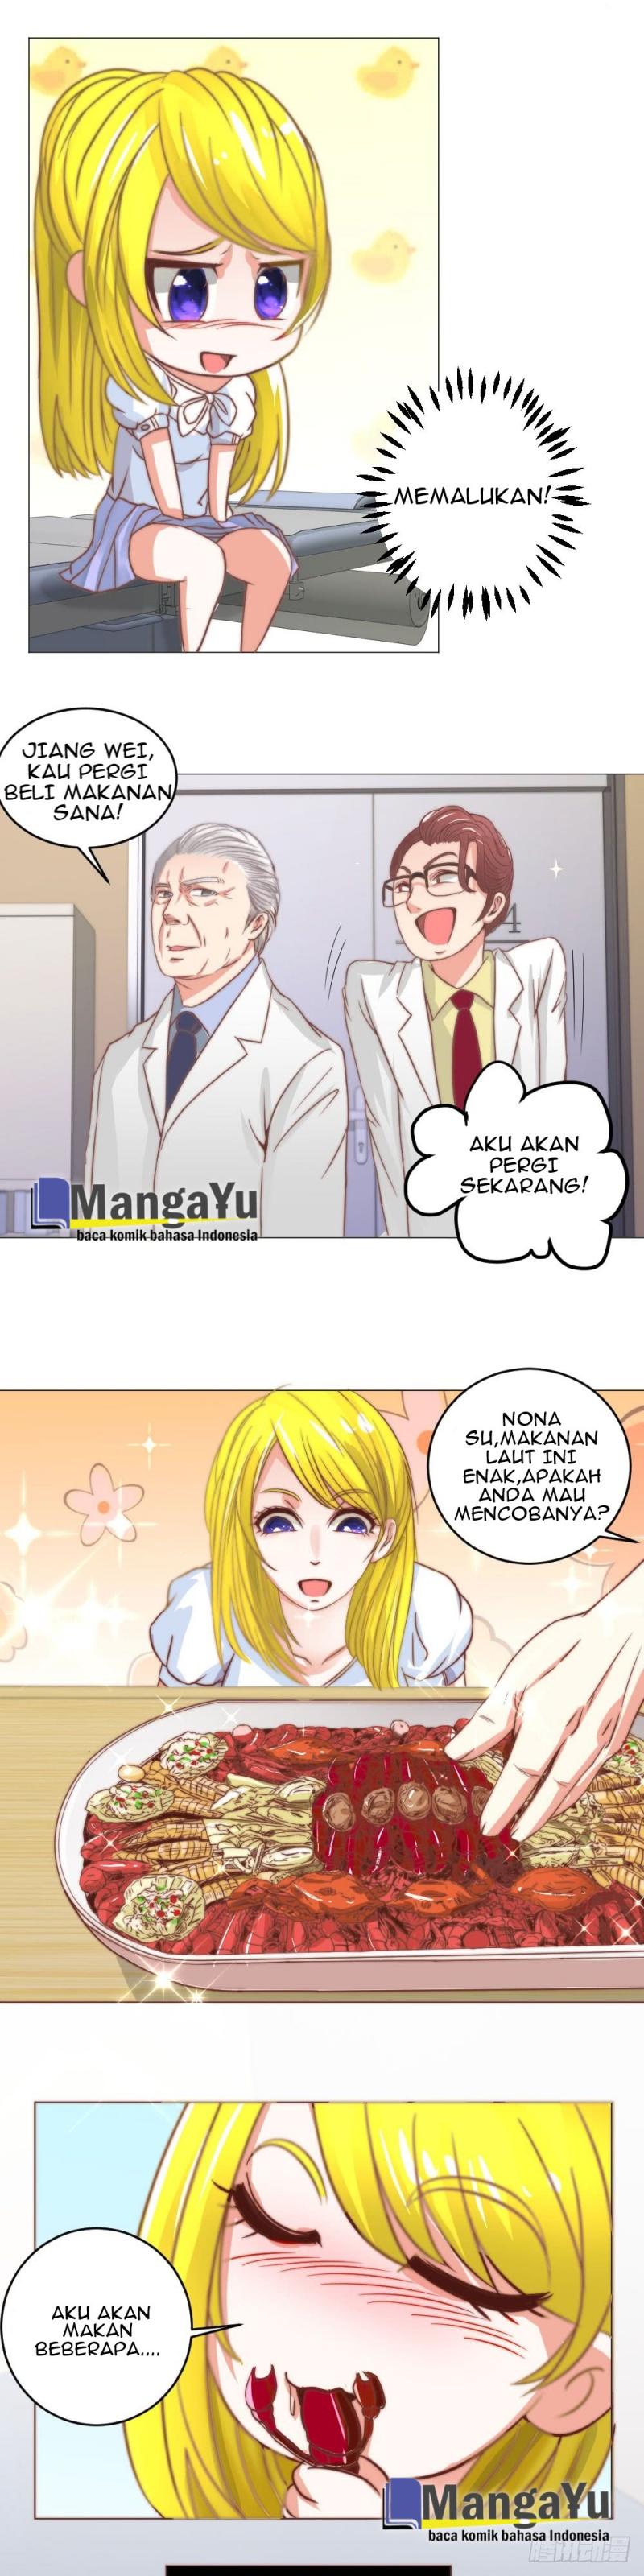 Perspective Medical Saint Chapter 4